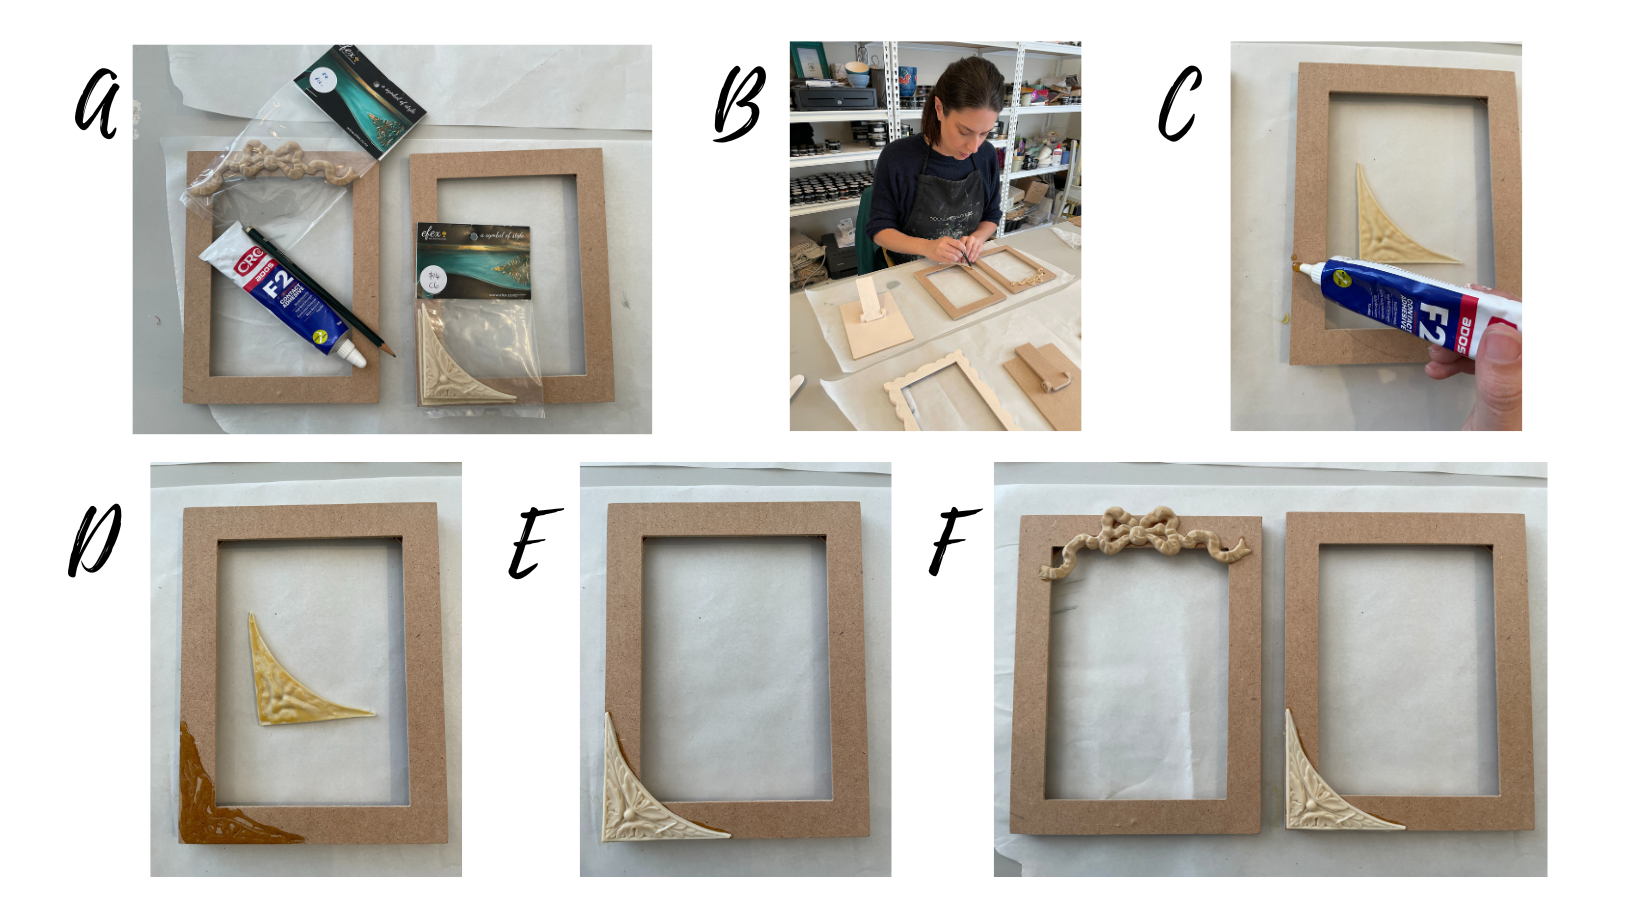 Applying Efex mouldings to a photo frame step by step